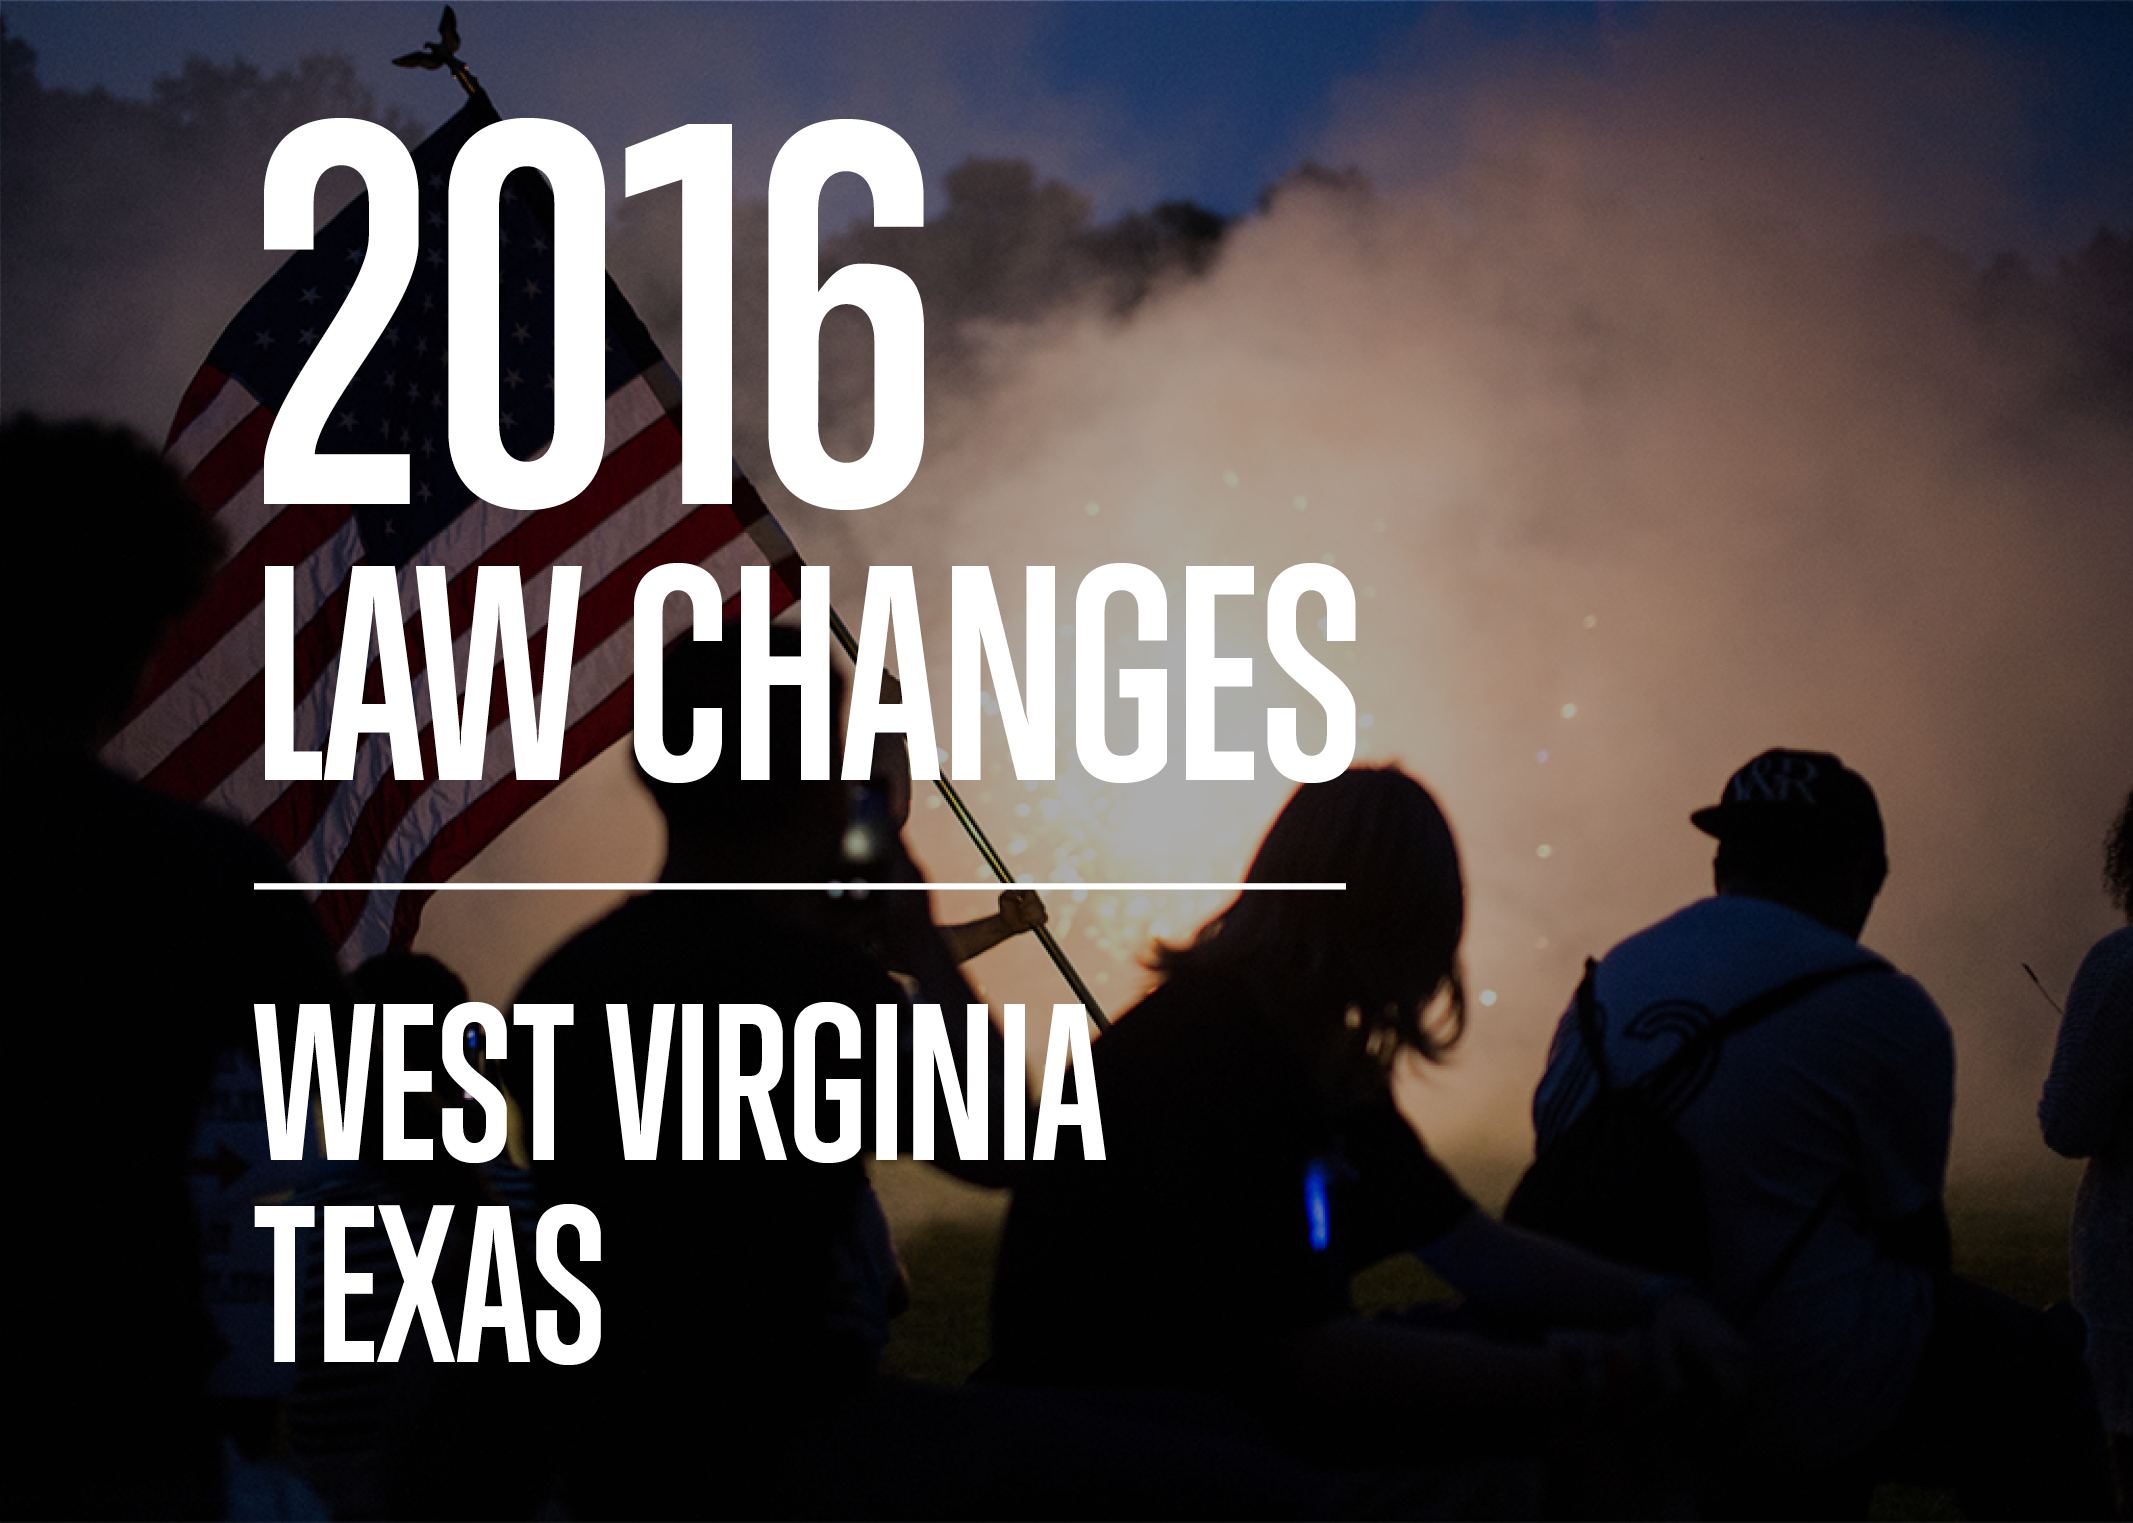 2016 Fireworks Law Changes - West Virginia, Texas